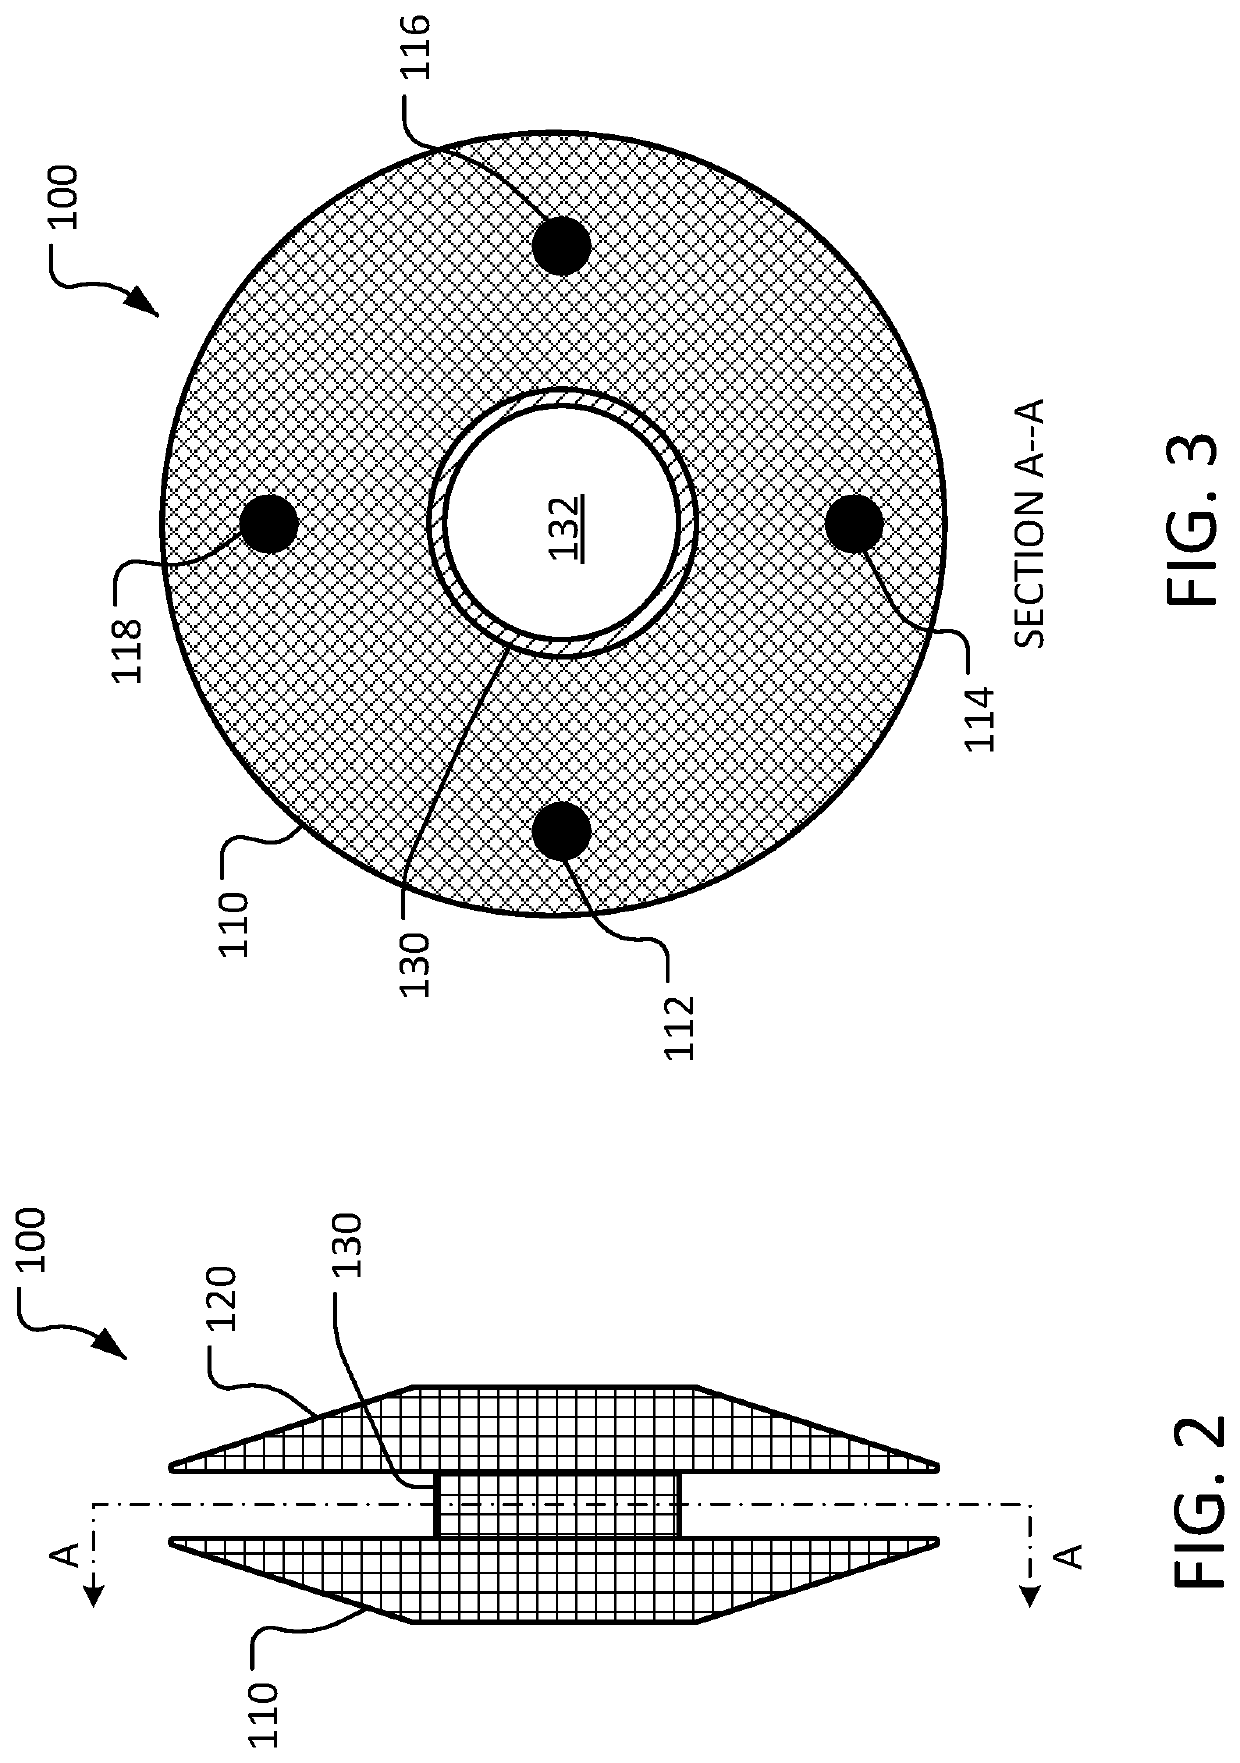 Devices and Methods for cardiac pacing and resynchrontzation